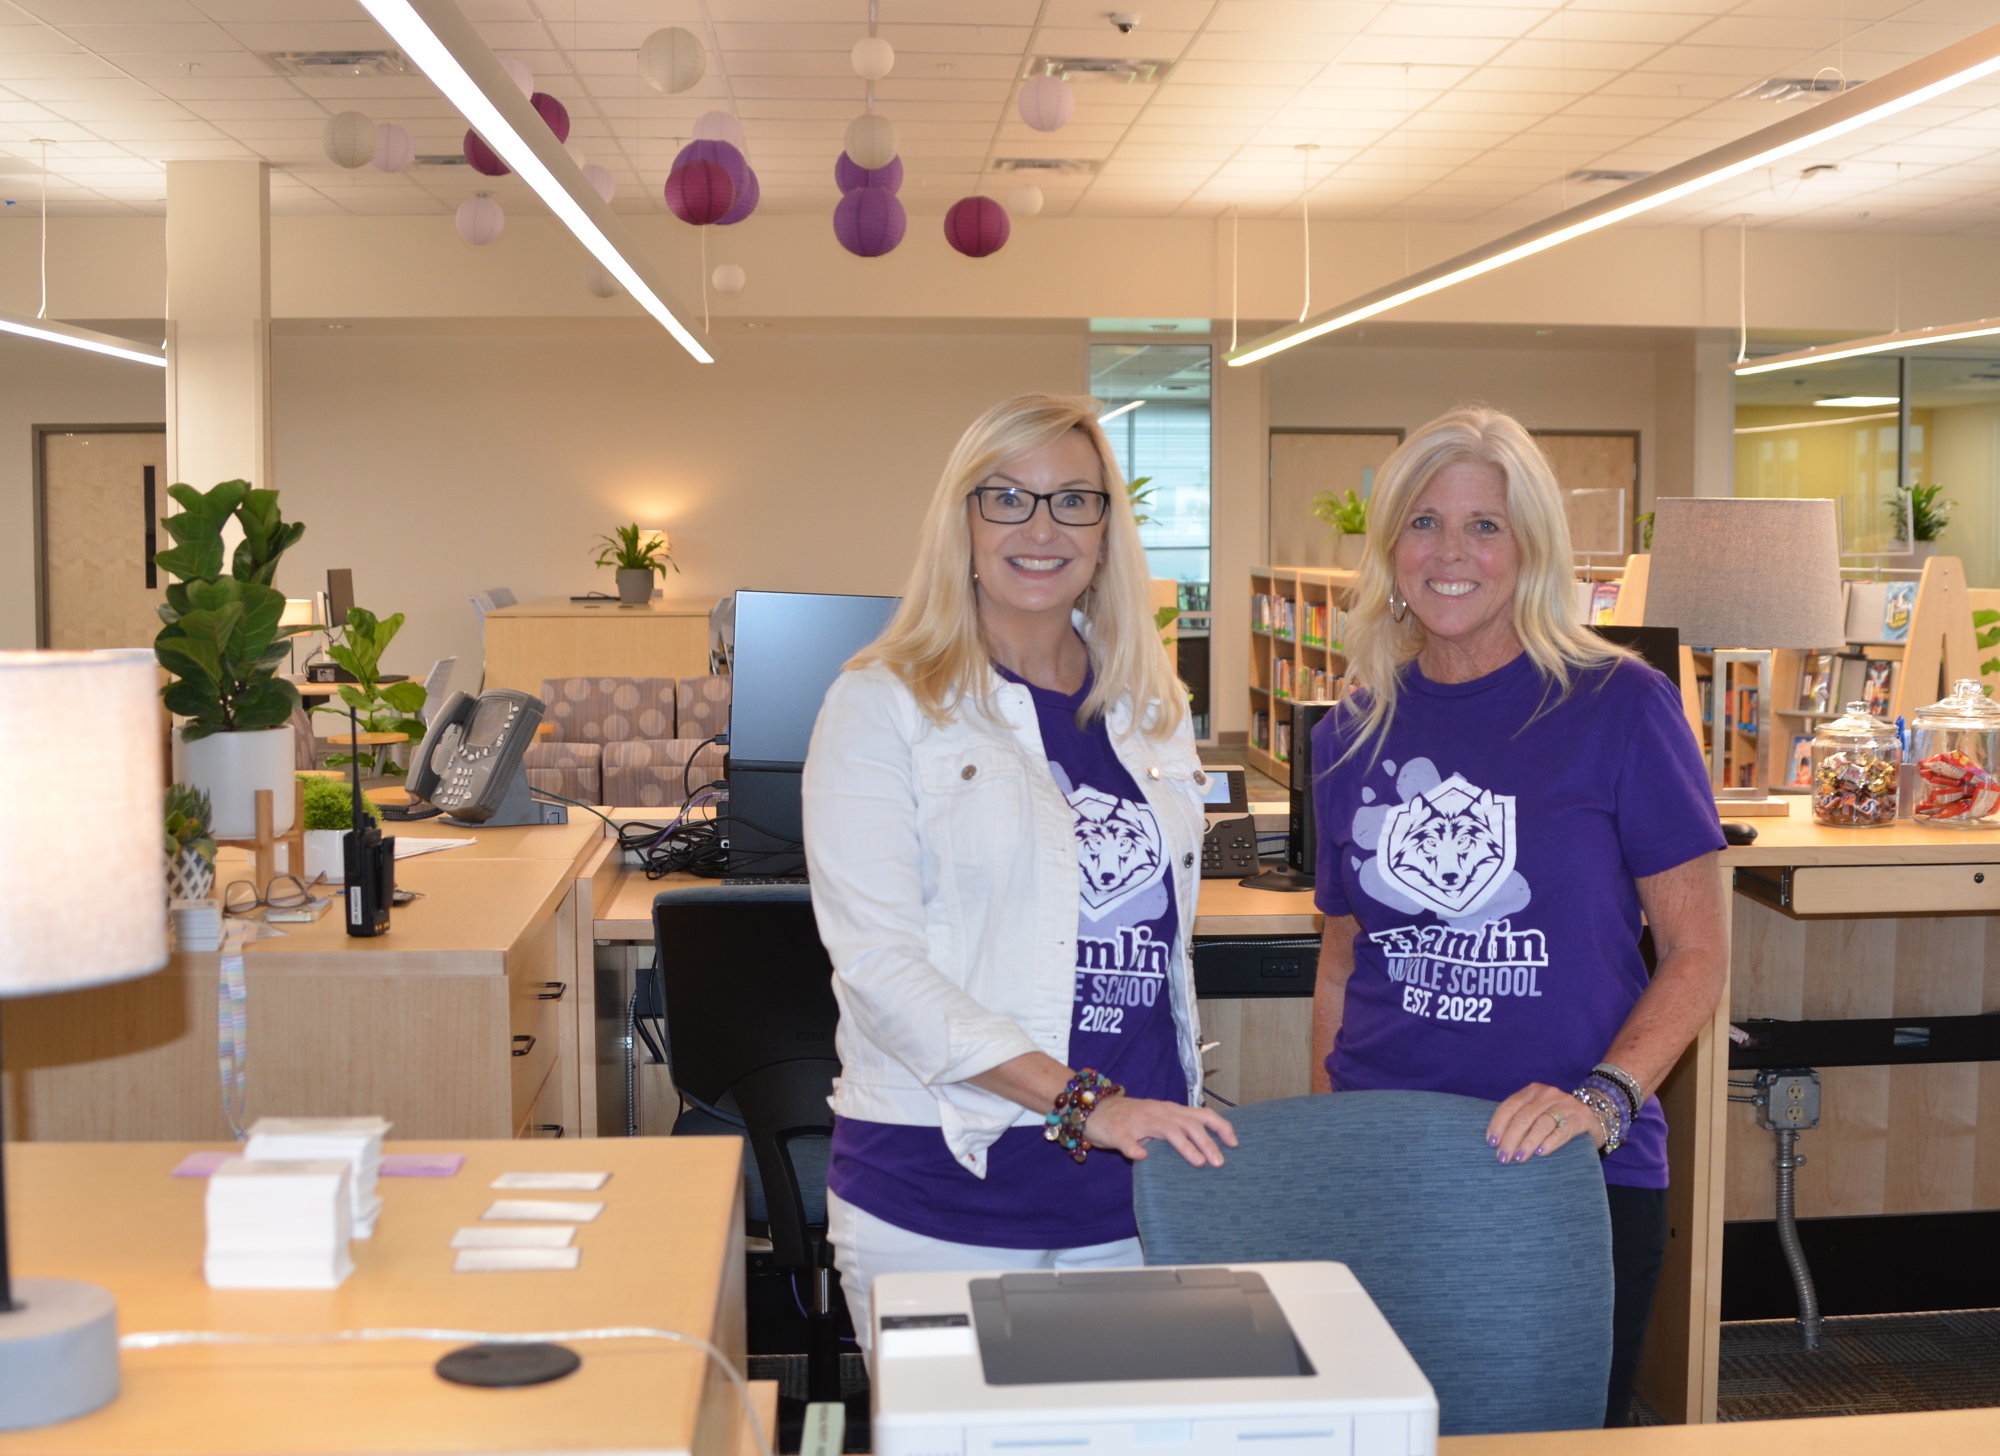 Media specialist Janet Anderson, left, and Dr. Suzanne Knight, principal, were pleased with the results of the media center at Hamlin Middle School.